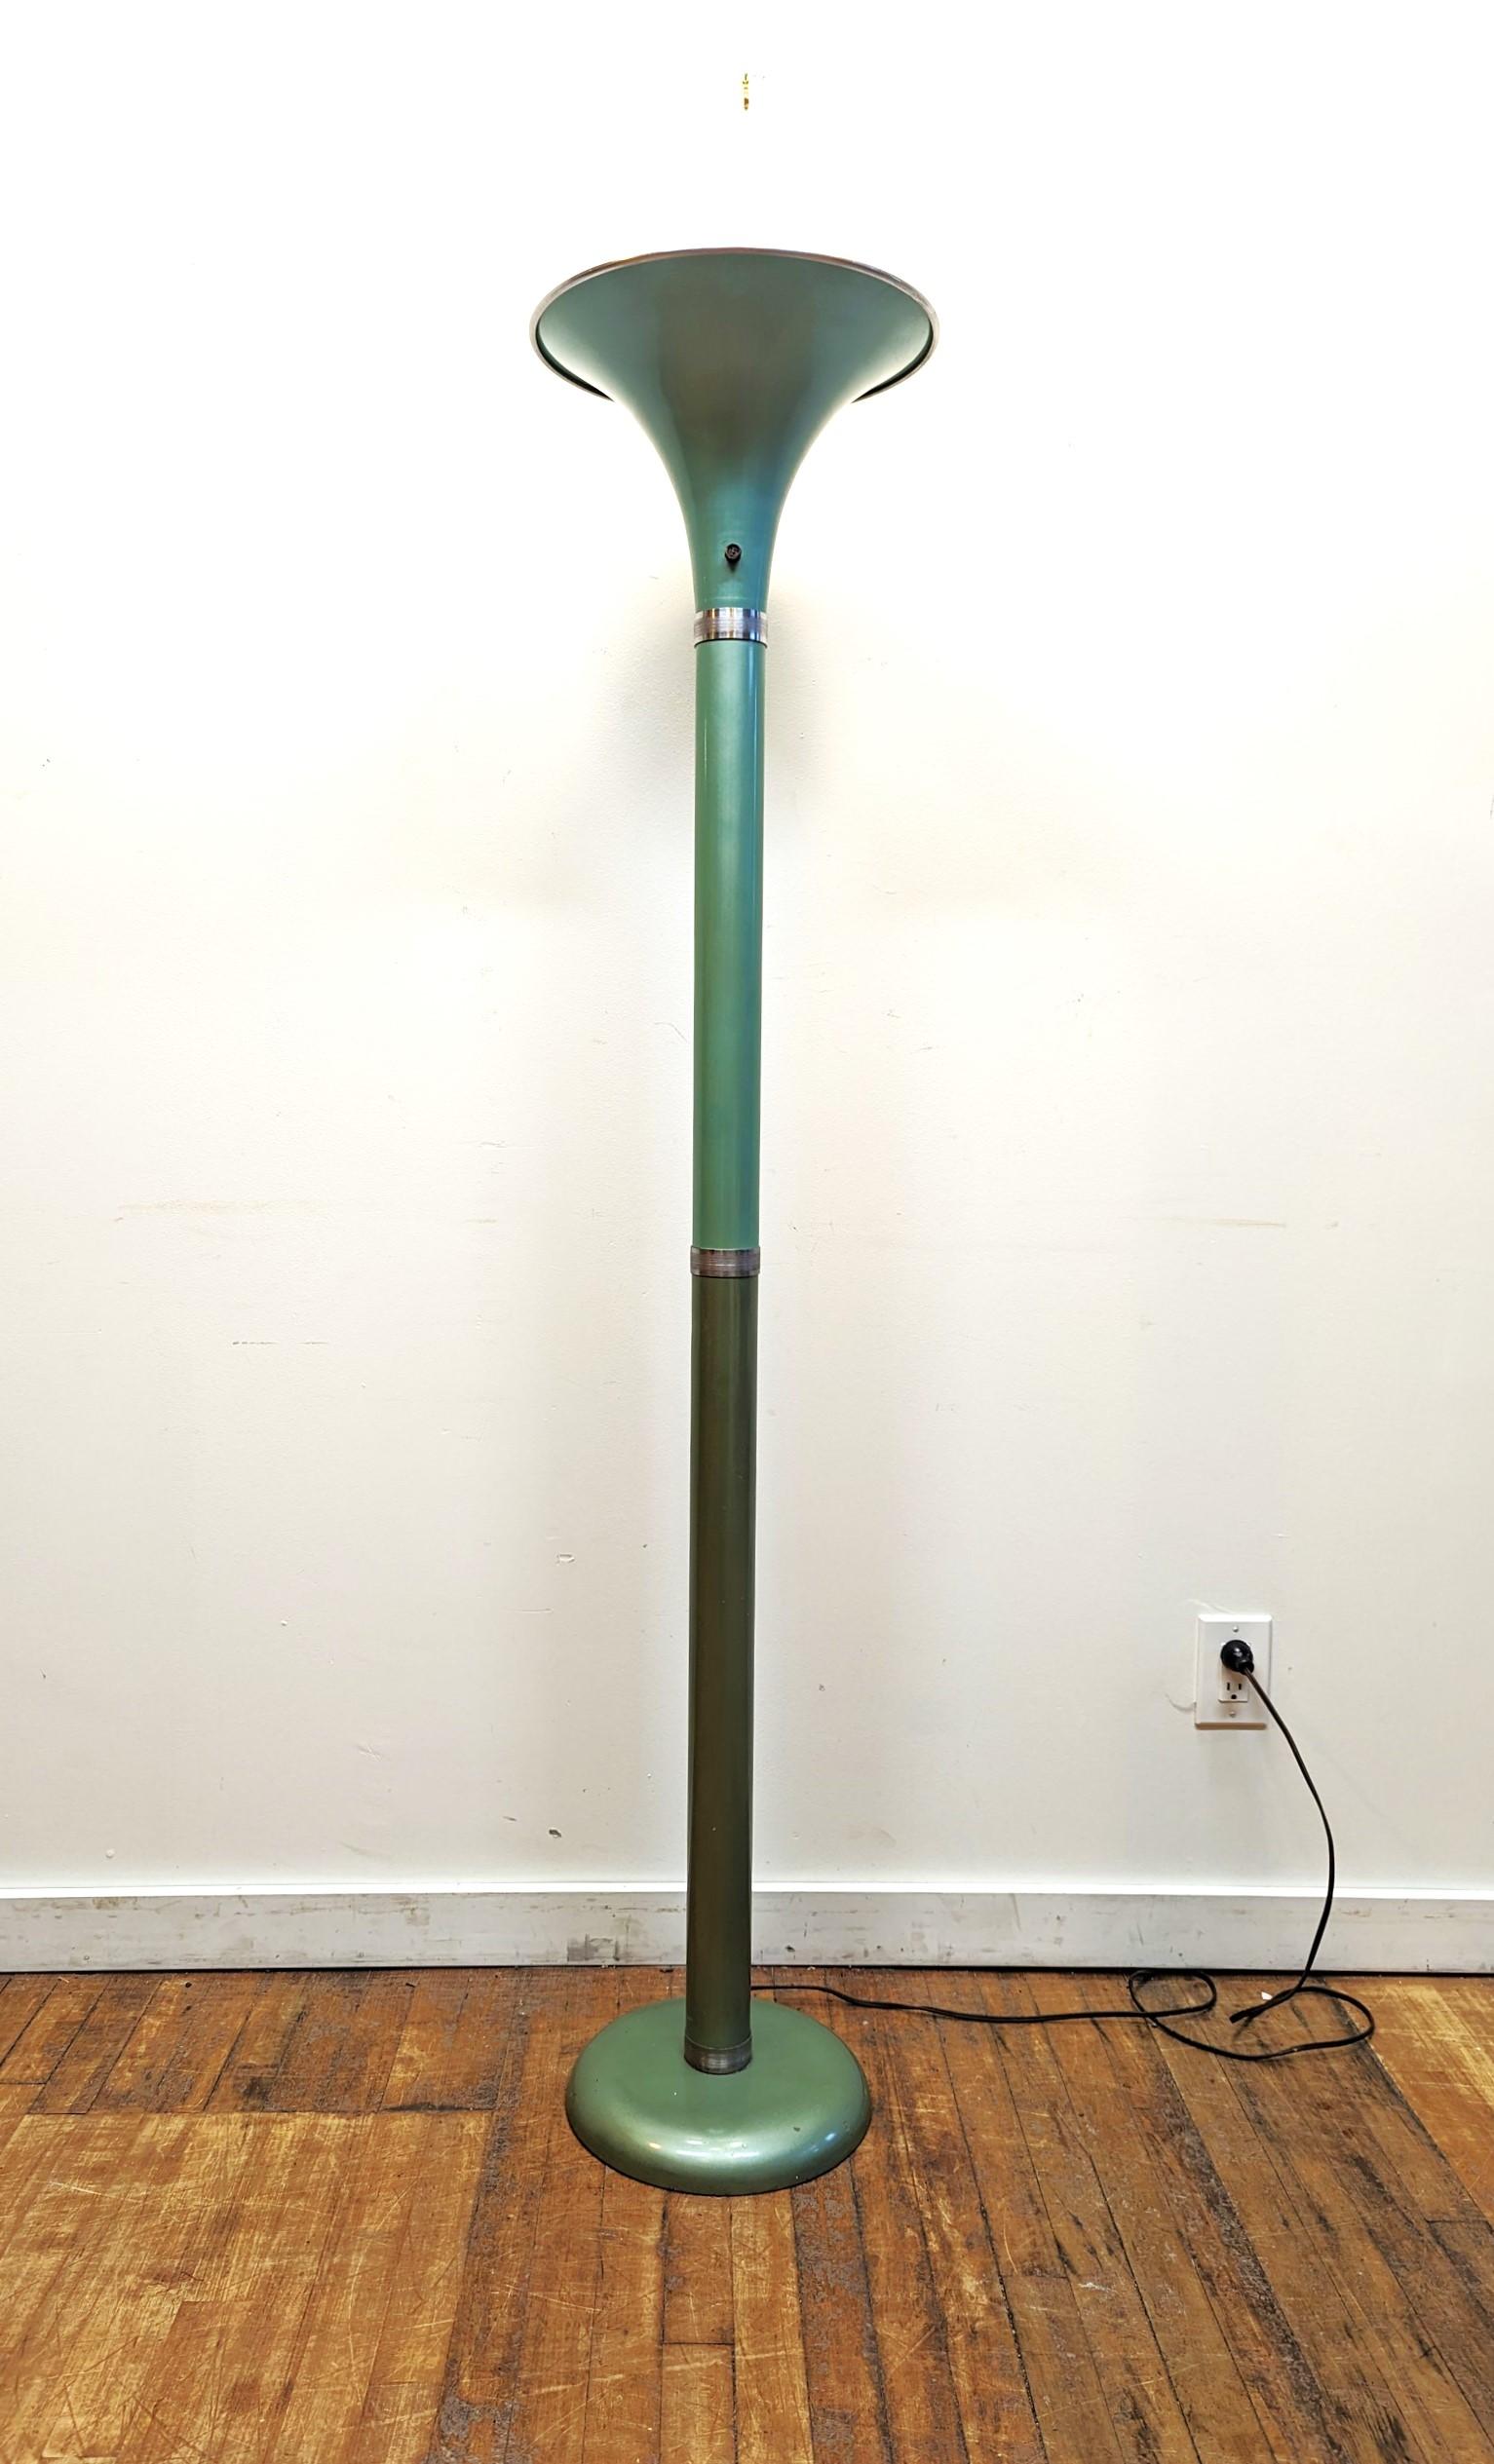 Mid Century Torch / Torchiere Floor Lamp in Aquamarine.  The color Aquamarine, Turquoise, also later became noted as Tiffany Blue.  A significant color being used by car manufactures and became iconic to the period 1950's.  This lamp is steel with